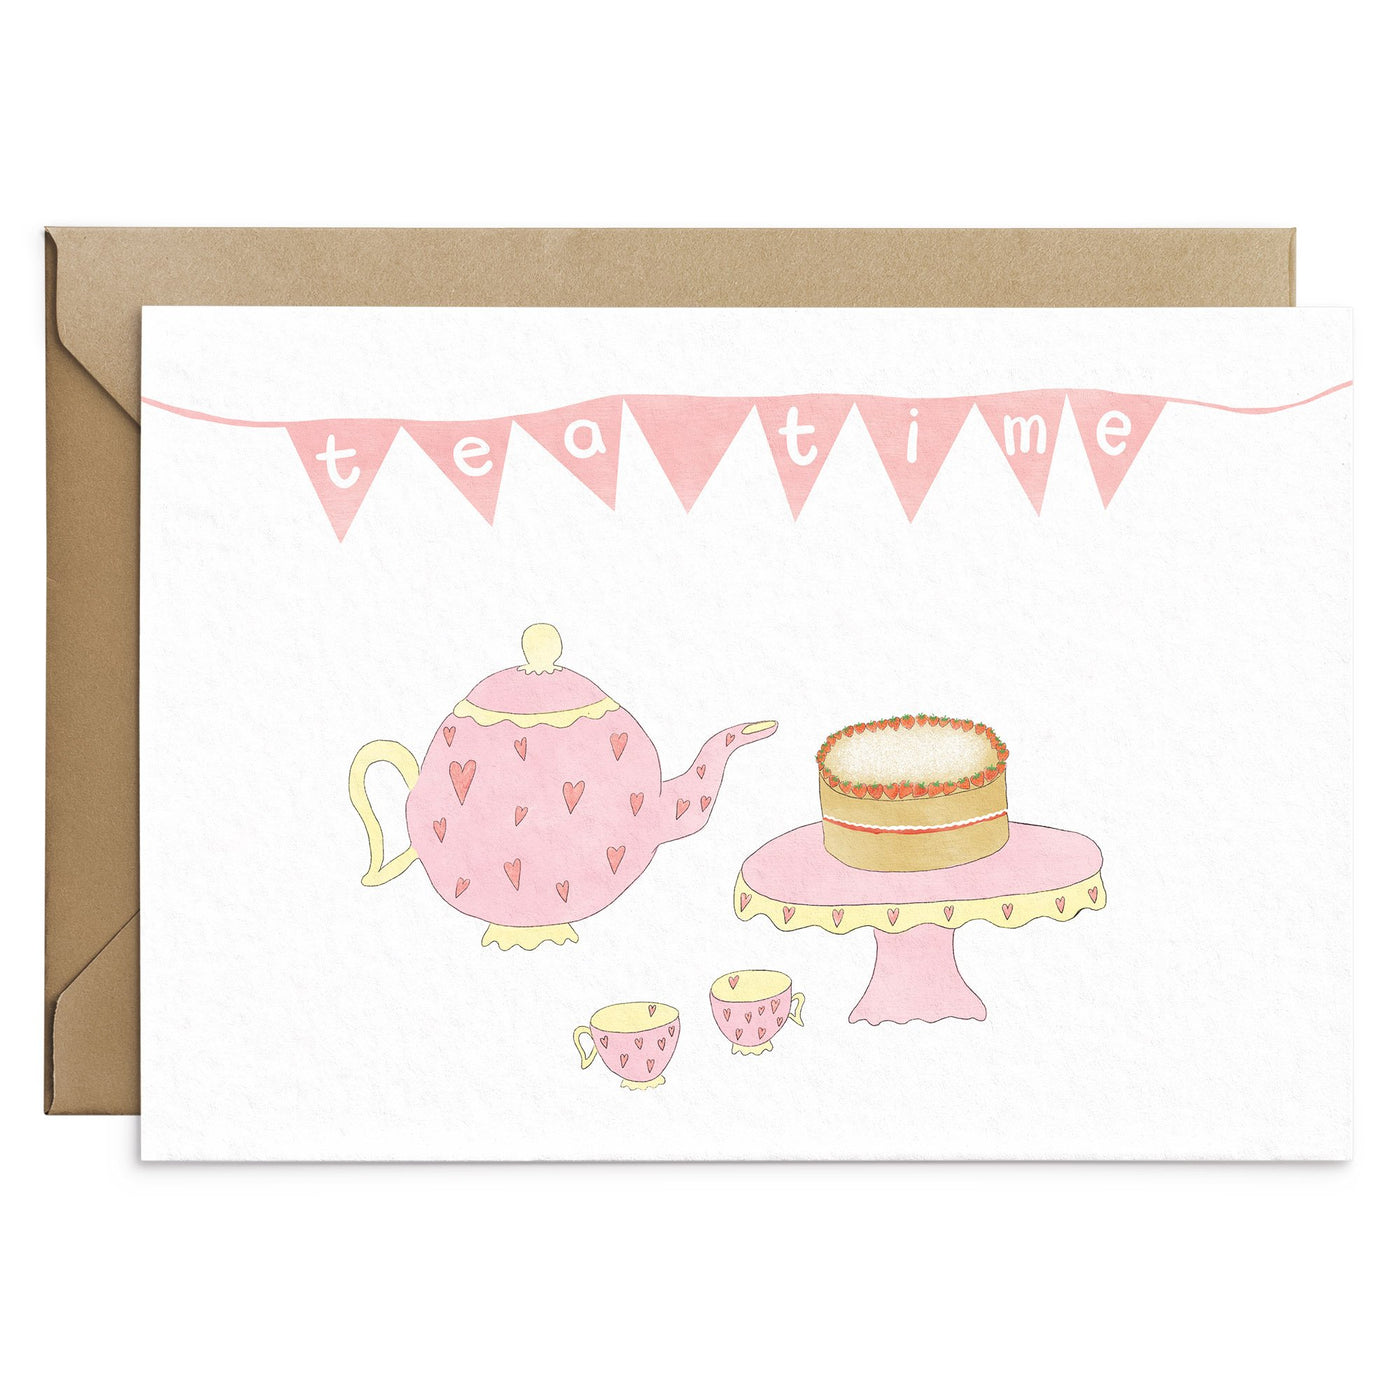 Afternoon Tea Party Card - Poppins & Co.